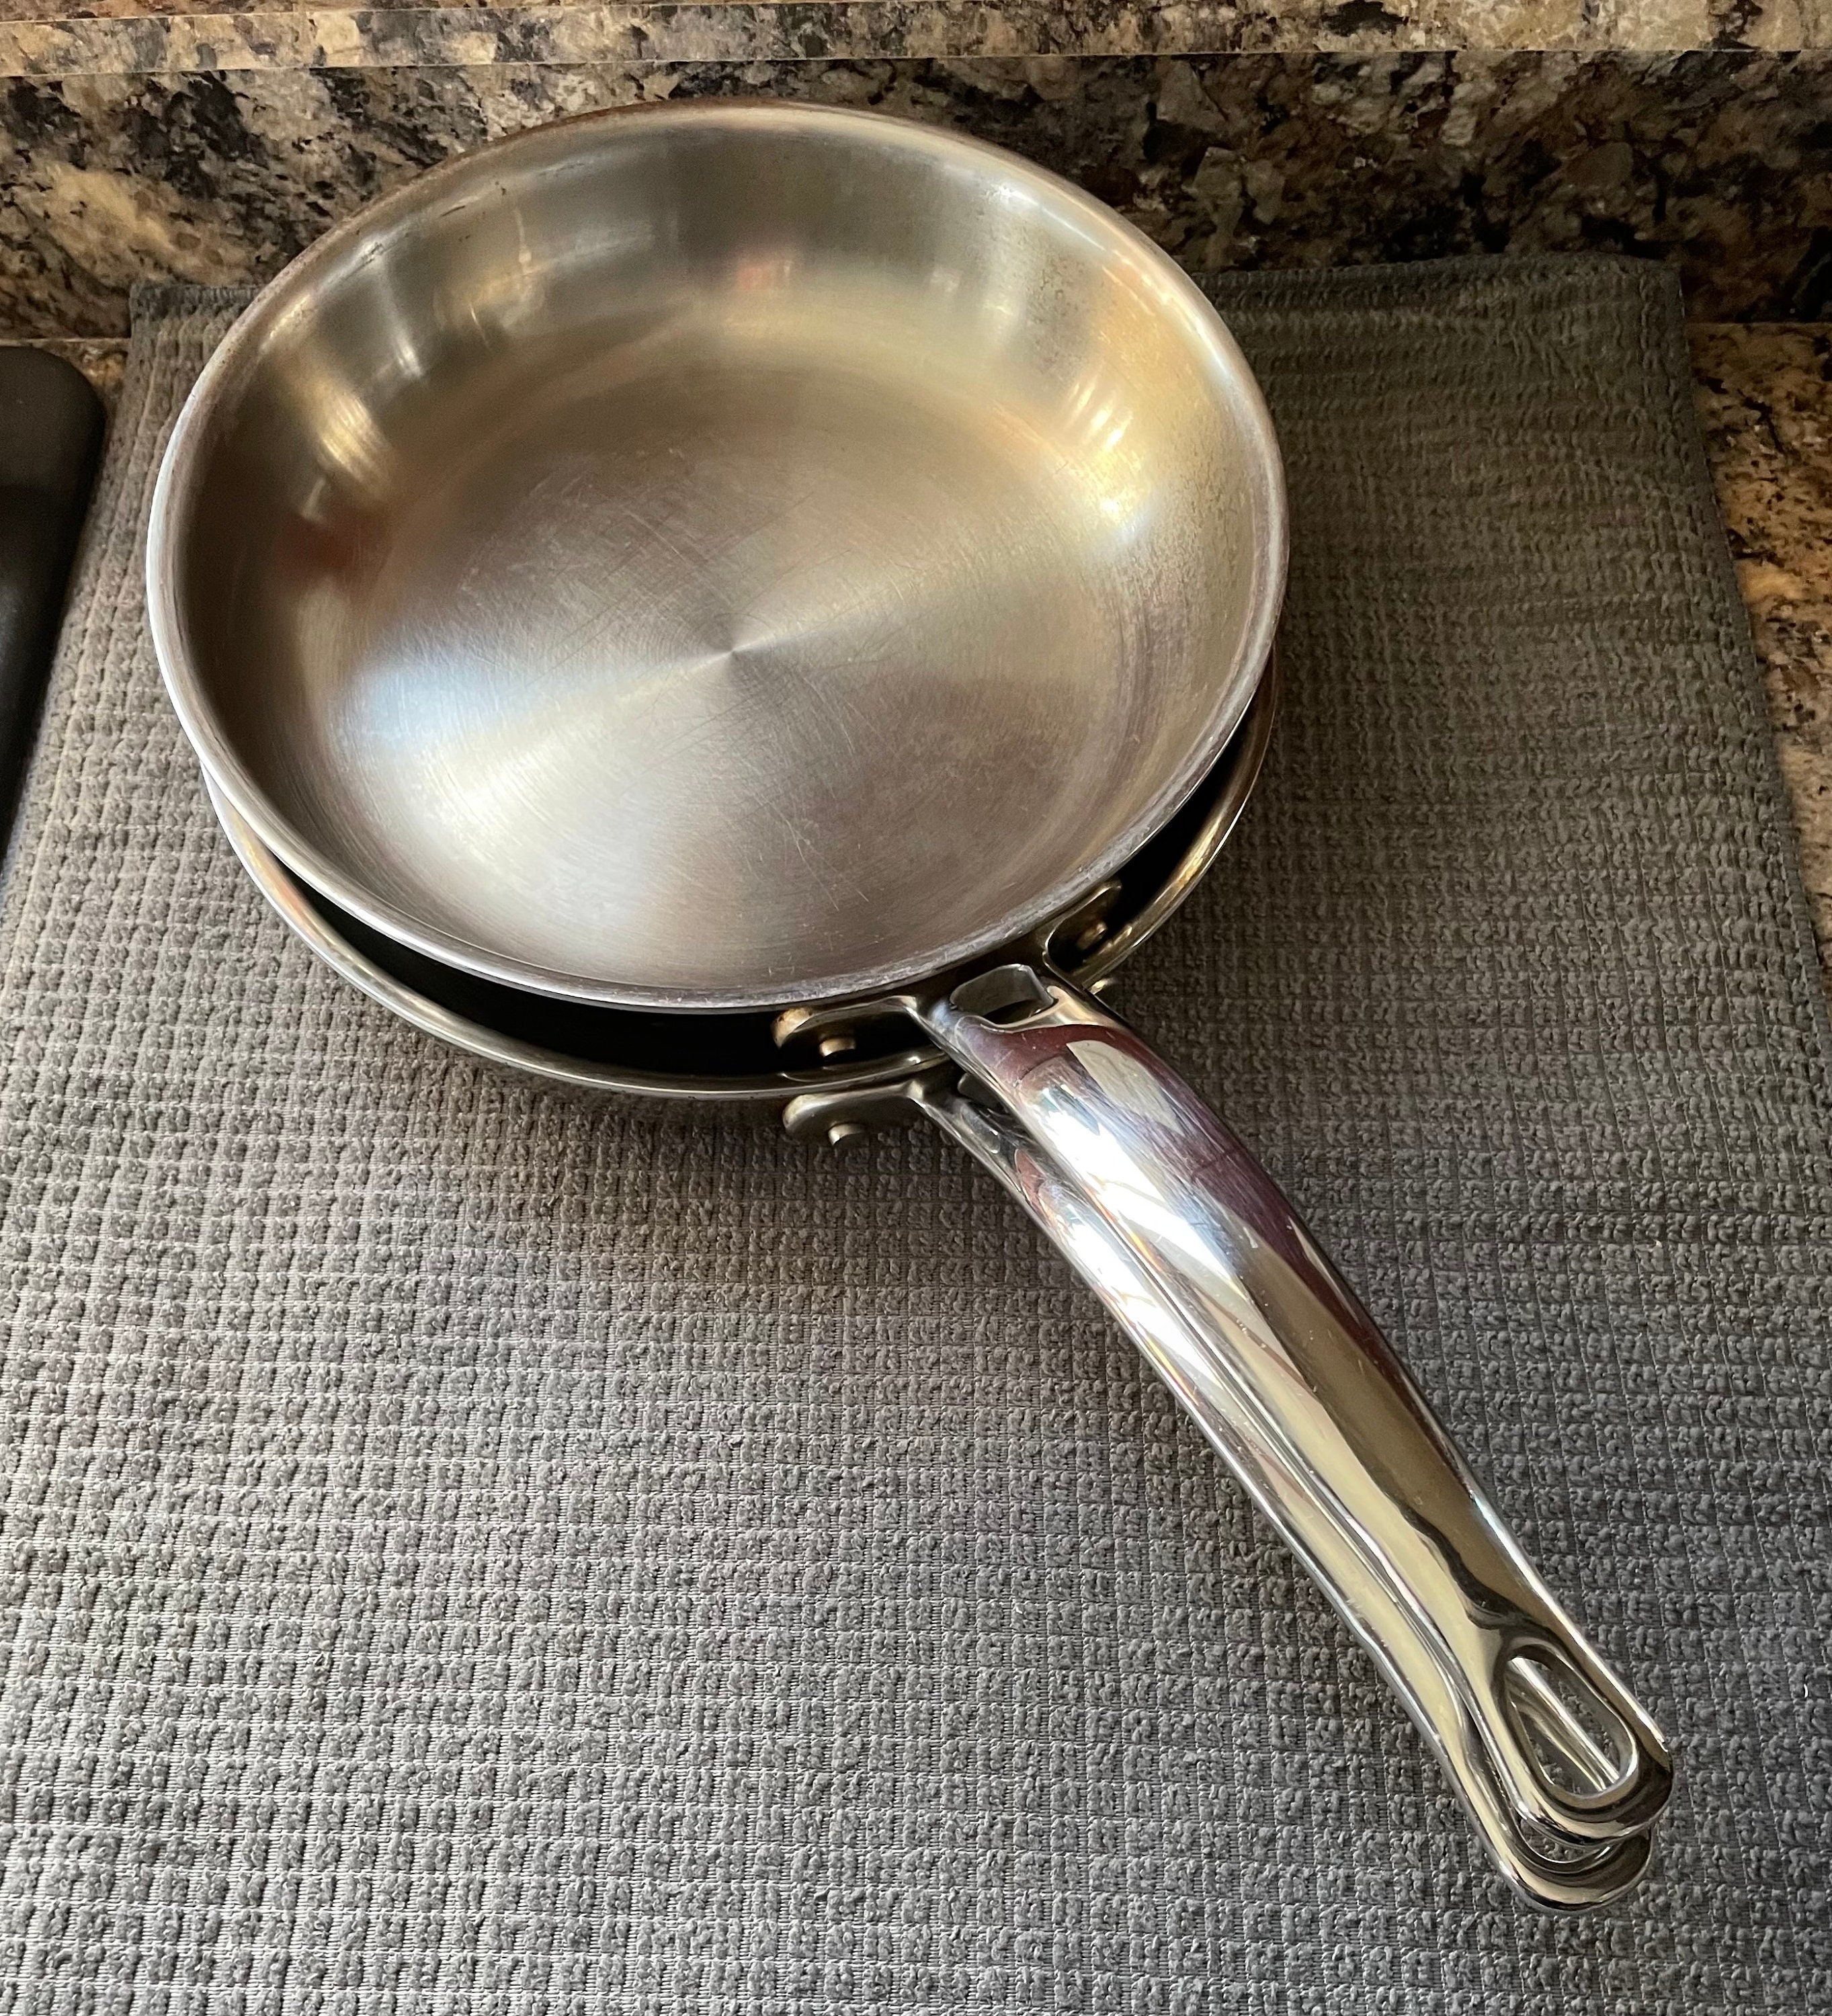 Vintage Lifetime 10 1/2 Inch Frying Pan/Skillet 18-8 Stainless